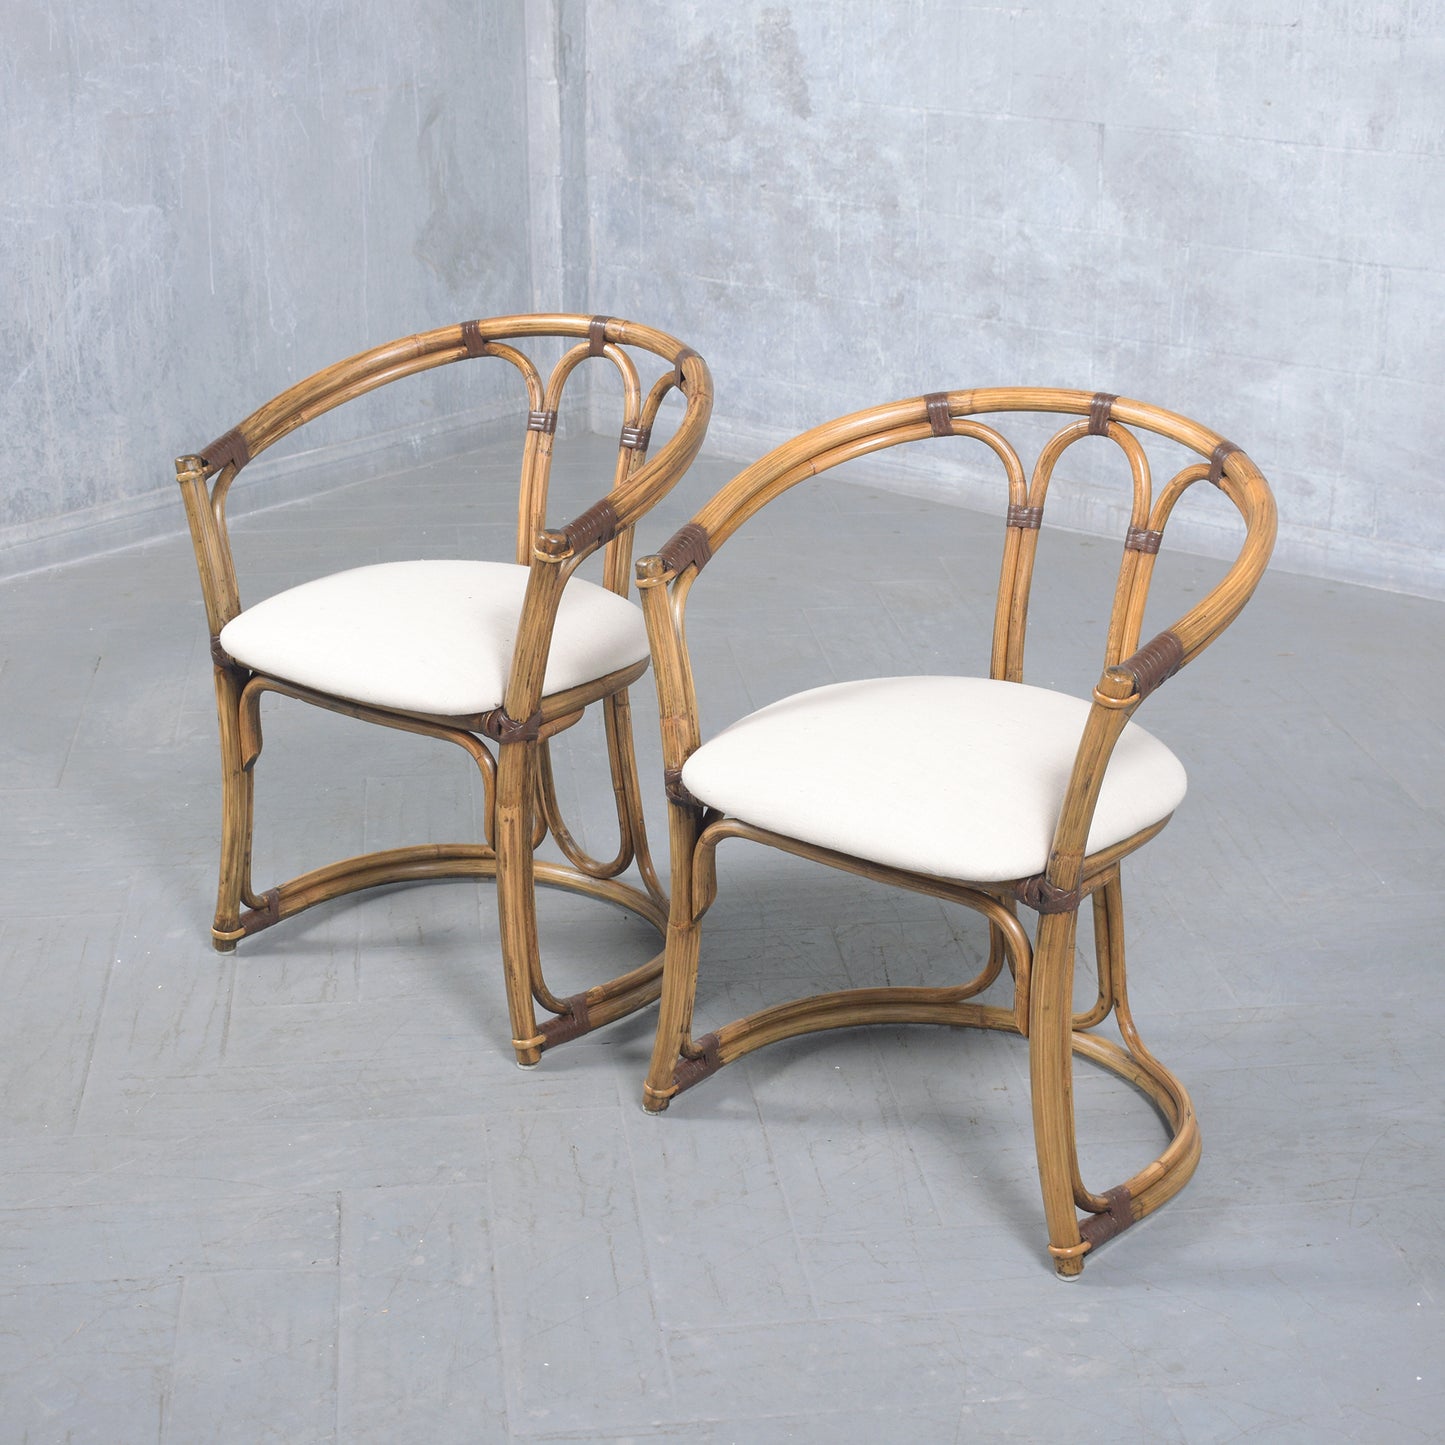 Restored Vintage Pair of Bamboo Barrel Chairs with Ivory Fabric